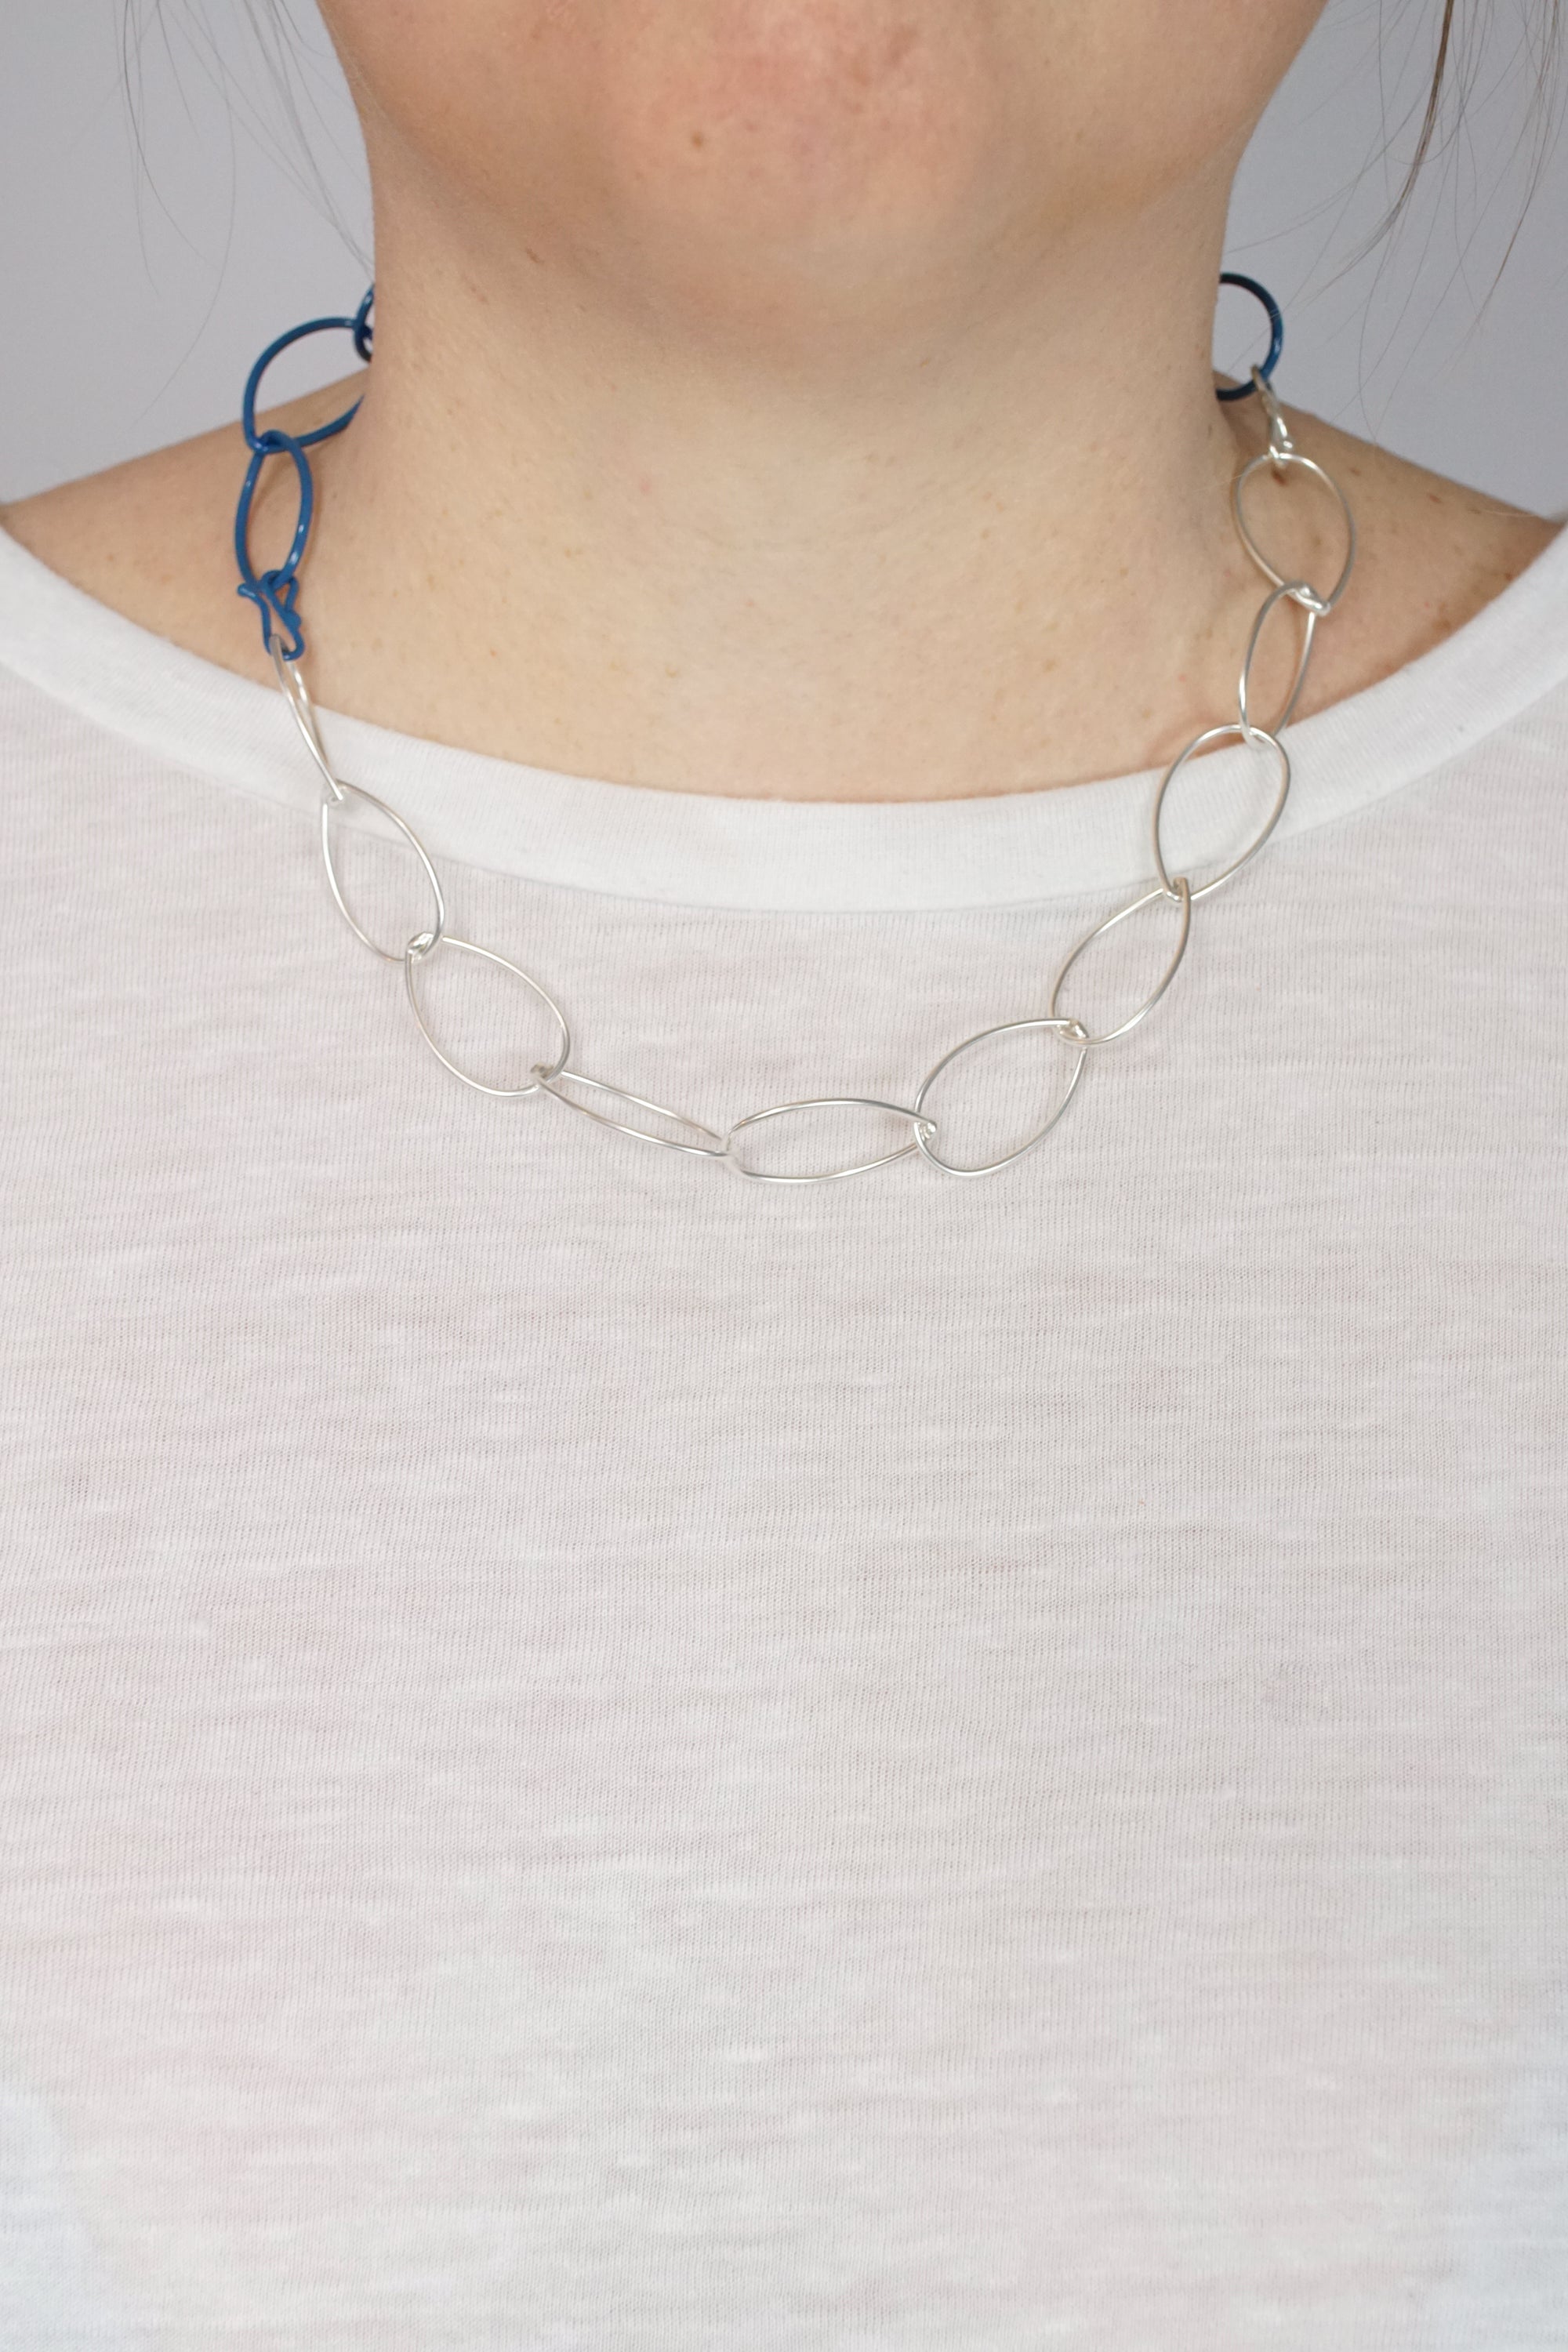 Audrey necklace in Silver and Azure Blue